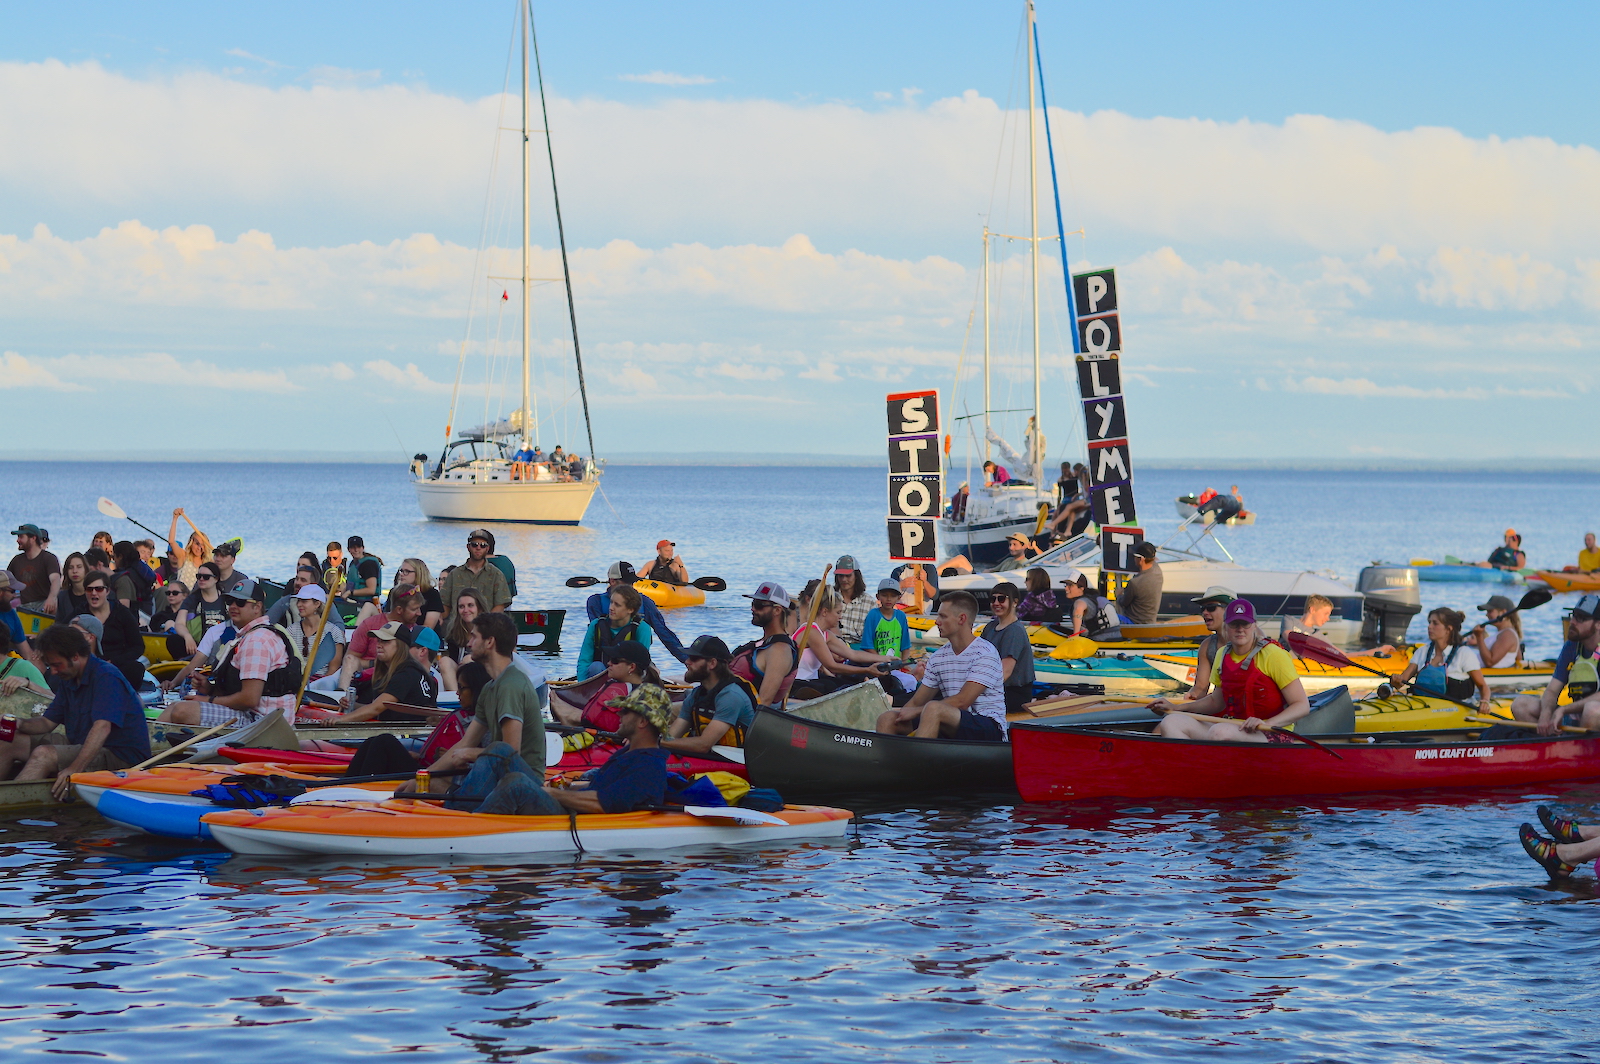 Protesters on boats hold up signs proclaiming "STOP POLYMET".